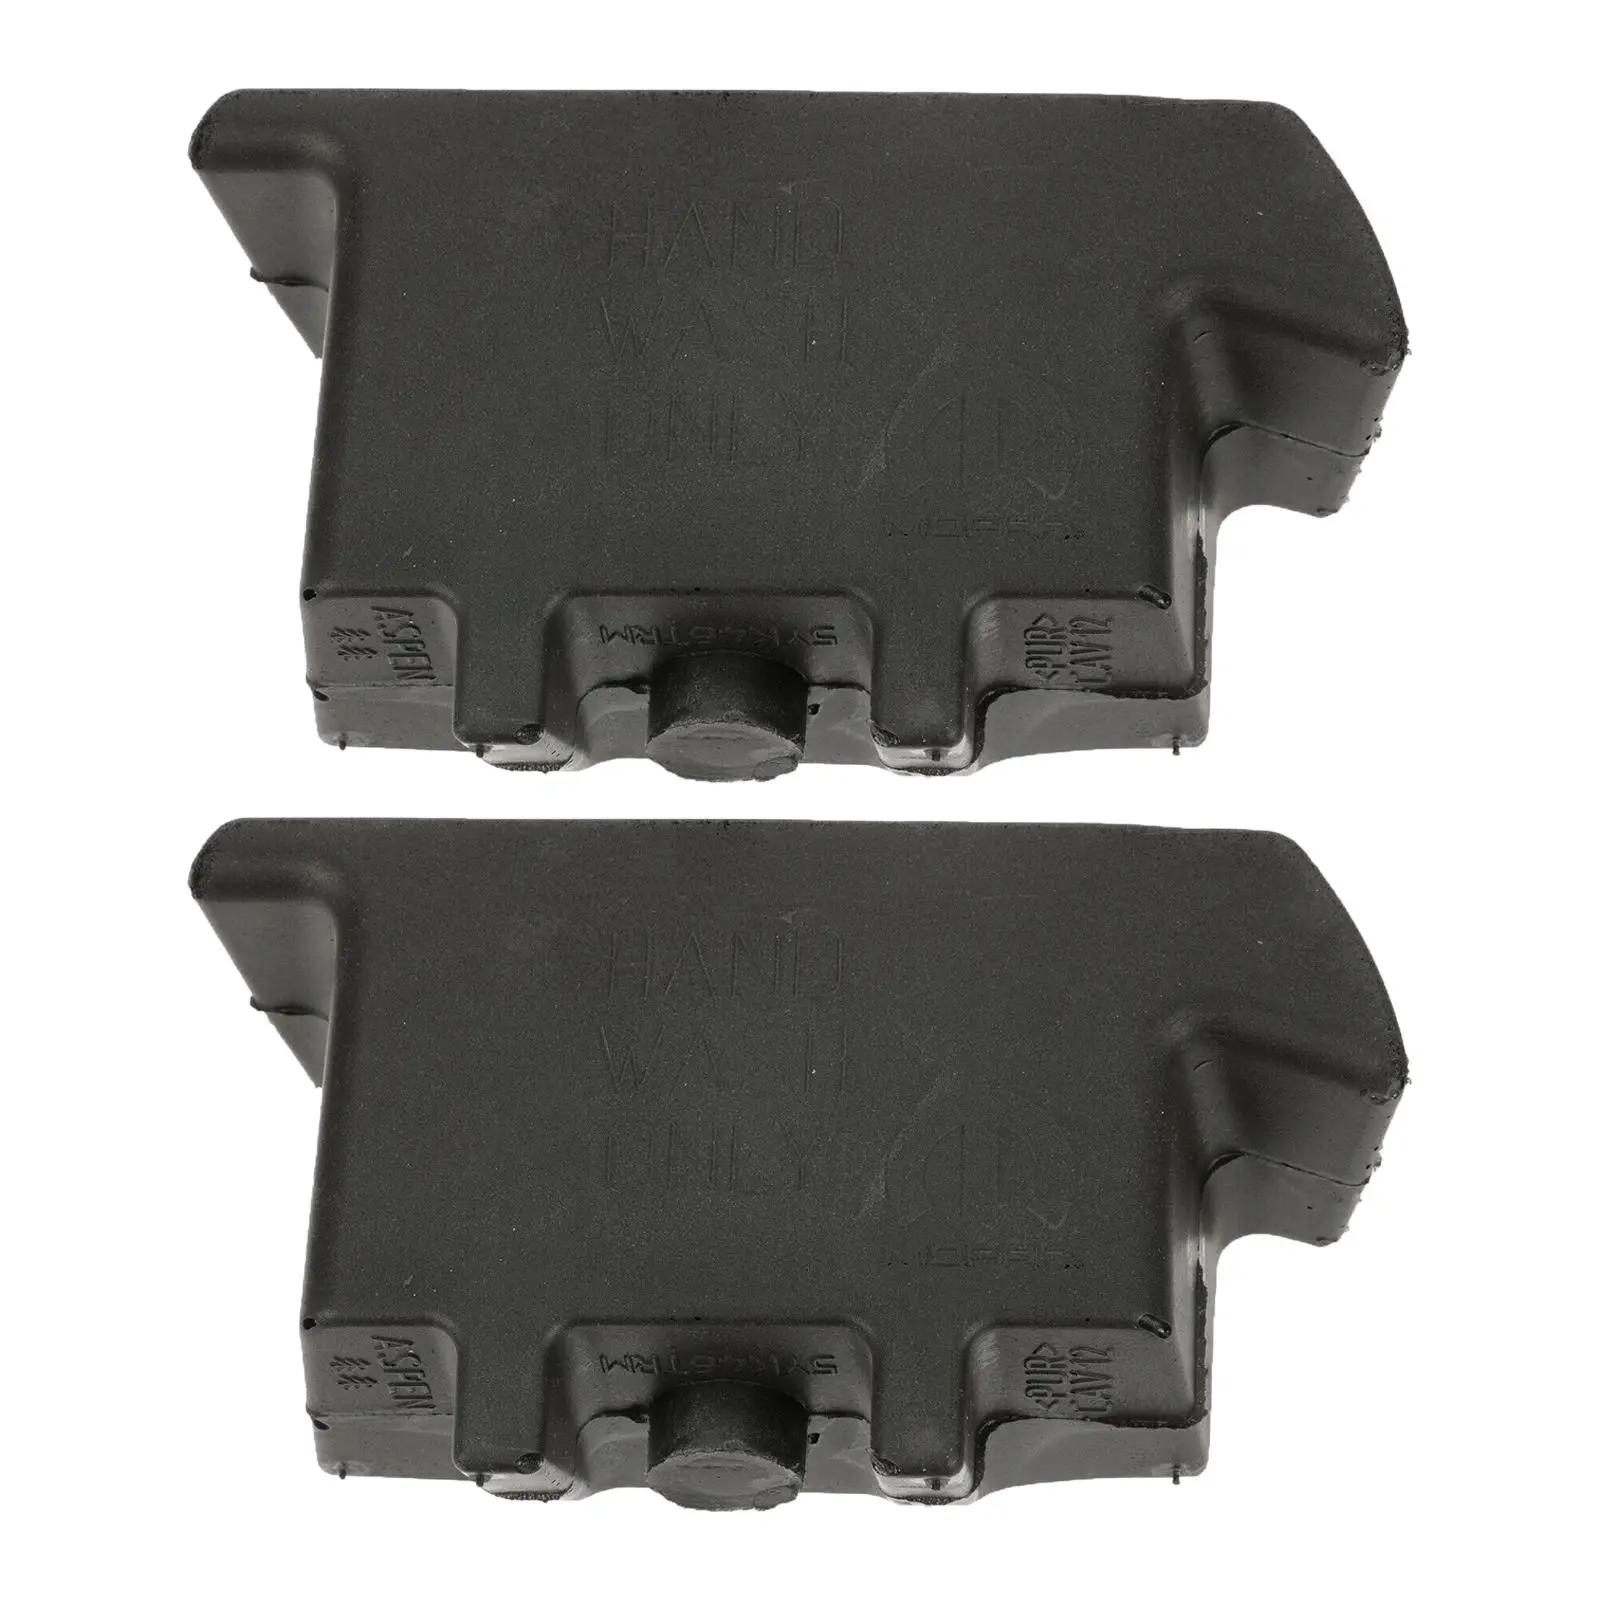 2pcs Left & Right Door Trim Cupholder for 1500 DT 19-21 Front Driver Passenger Drink Holder 5YK46TX7AC 5YK47TRM Replace Acc